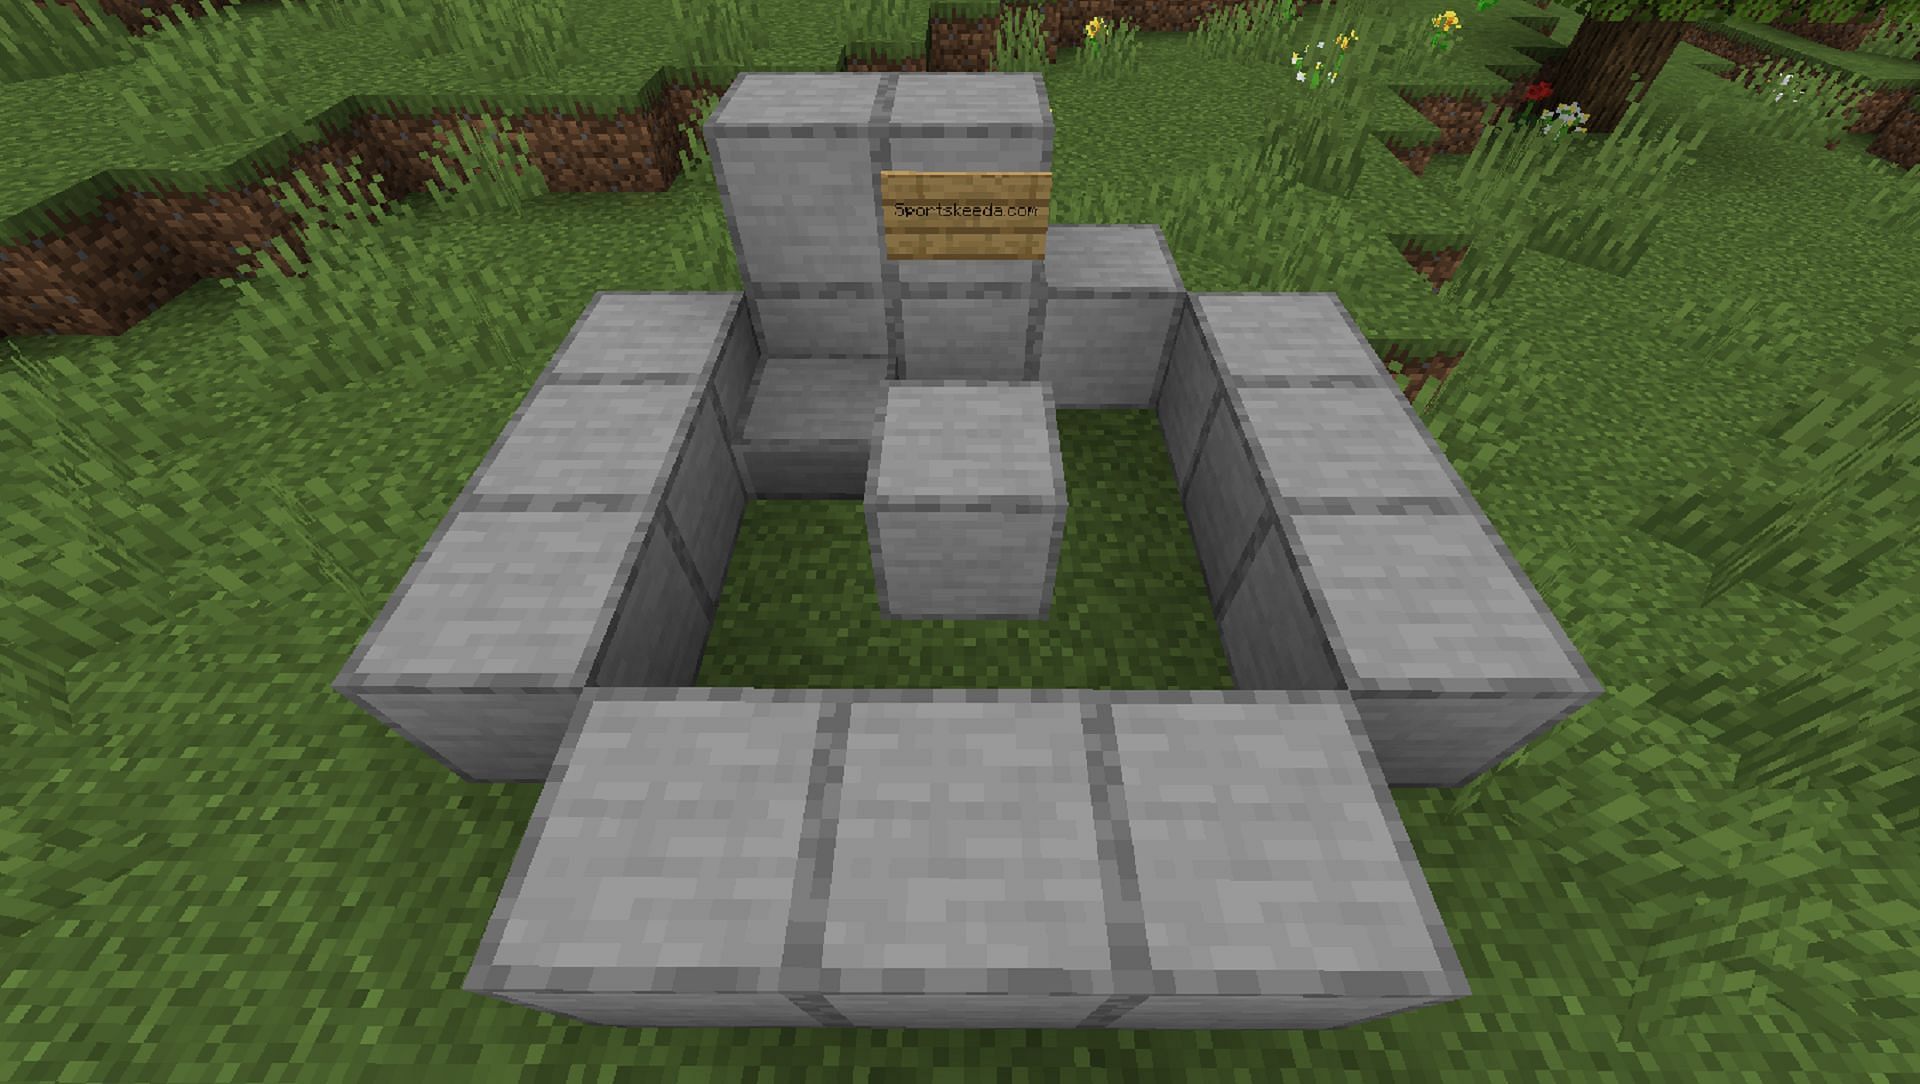 The same AFK pool without its water, displaying the block placement and slab corner necessary to ensure the water flow (Image via Mojang)